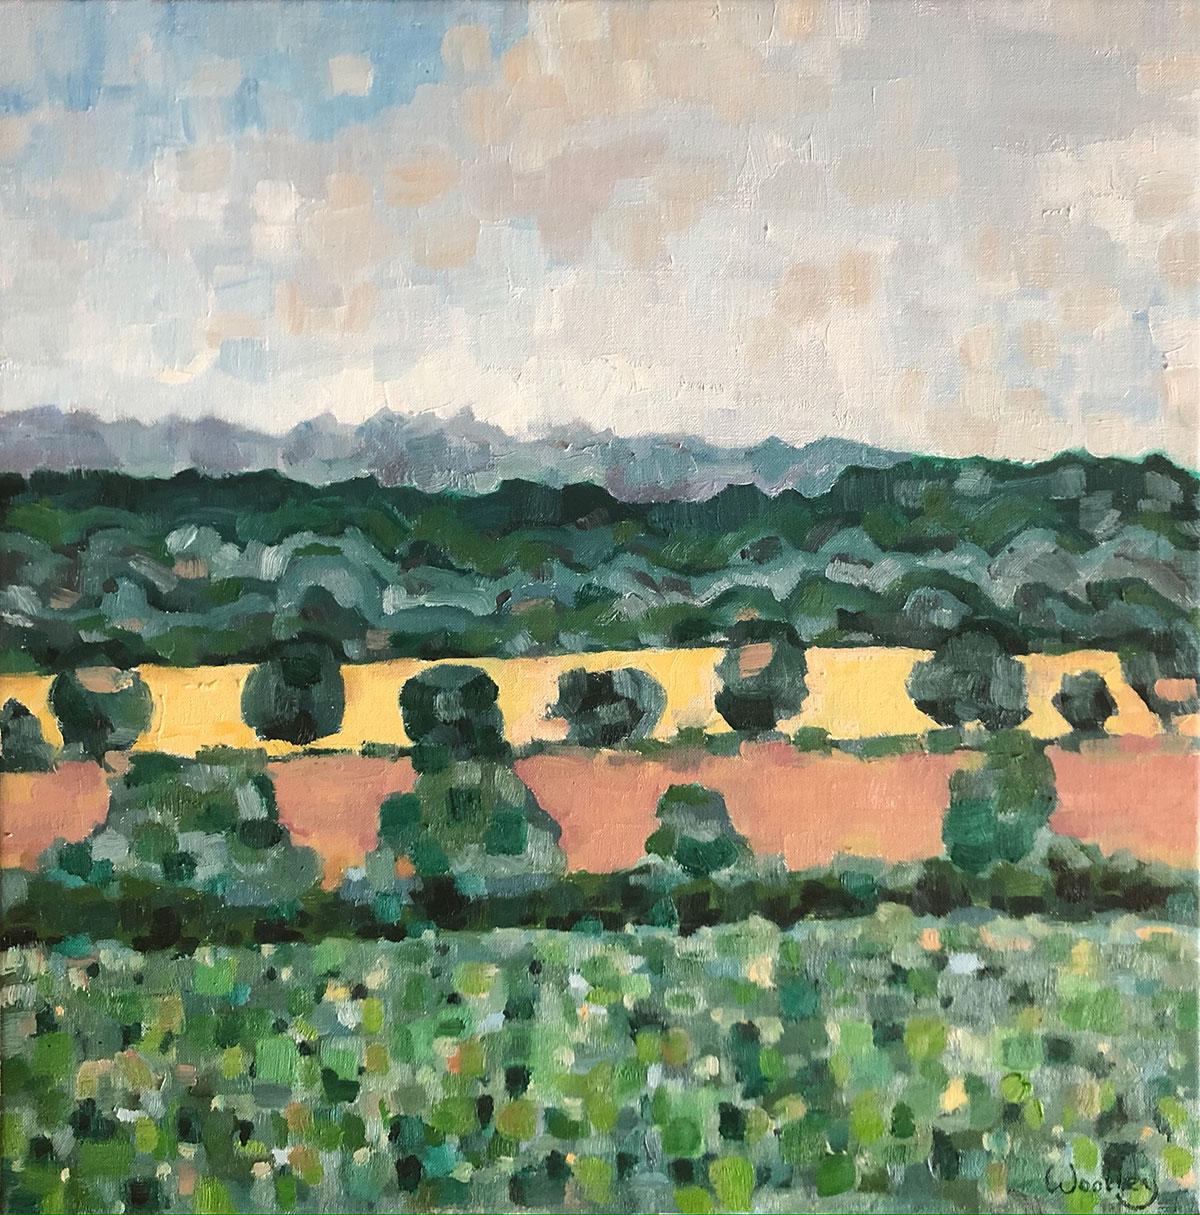 Eleanor Woolley  Landscape Painting - View from Whispering Knights Rollright by Eleanor Woolley, Original painting